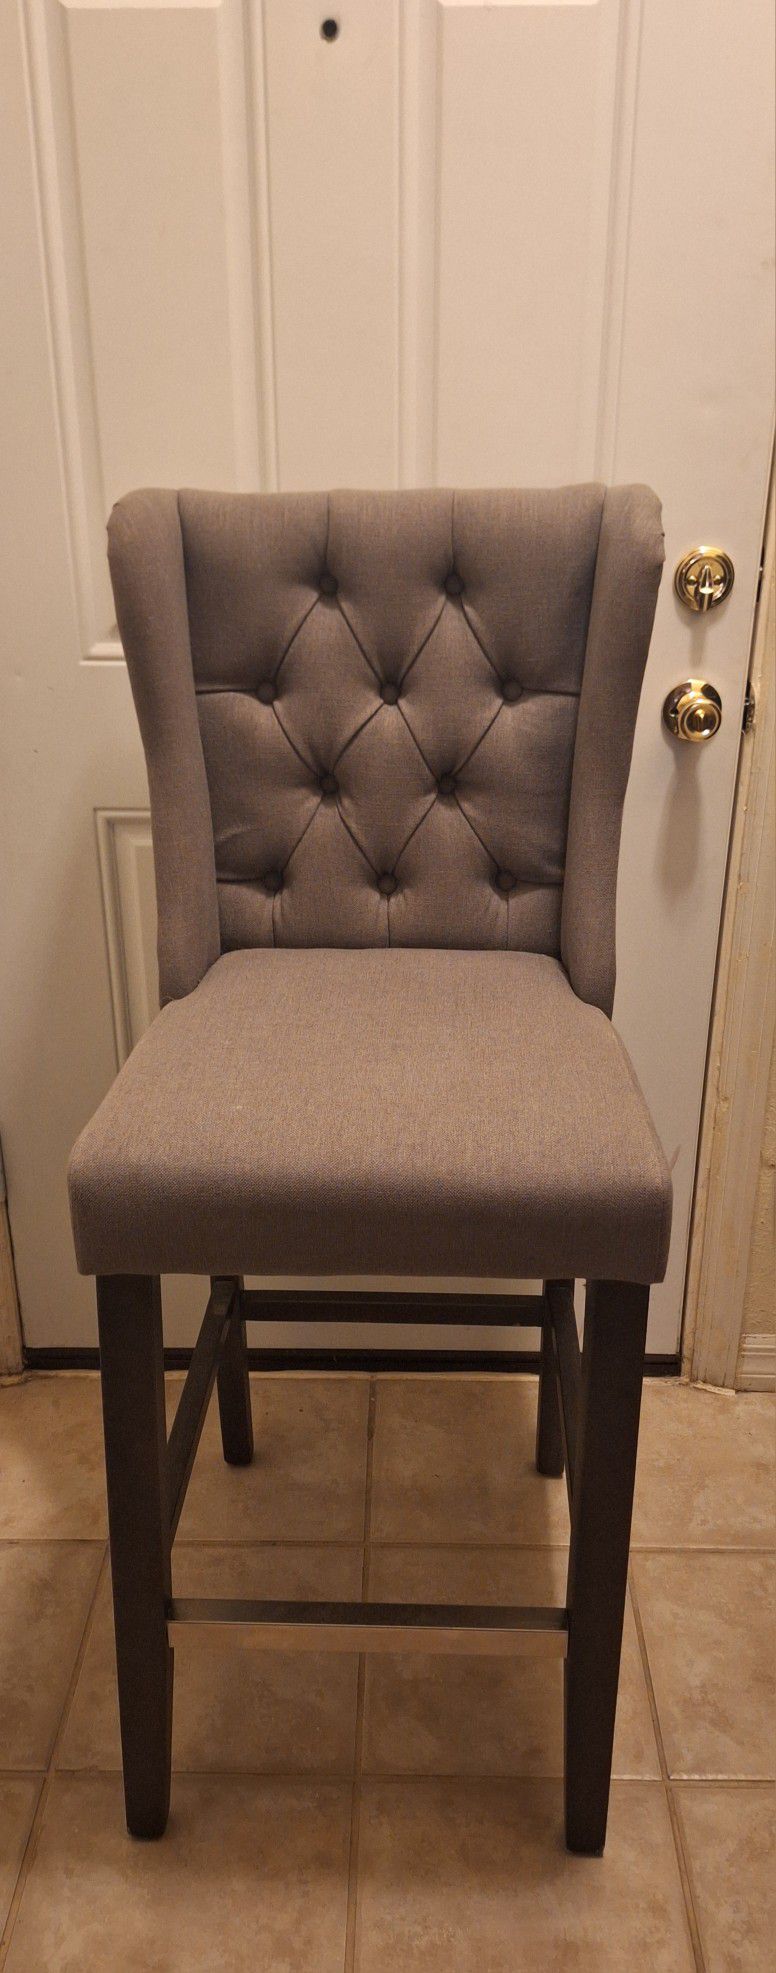 DELIVERY AVAILABLE! LIKE NEW! COUNTER HEIGHT GRAY BARSTOOL CHAIR WITH BACK 